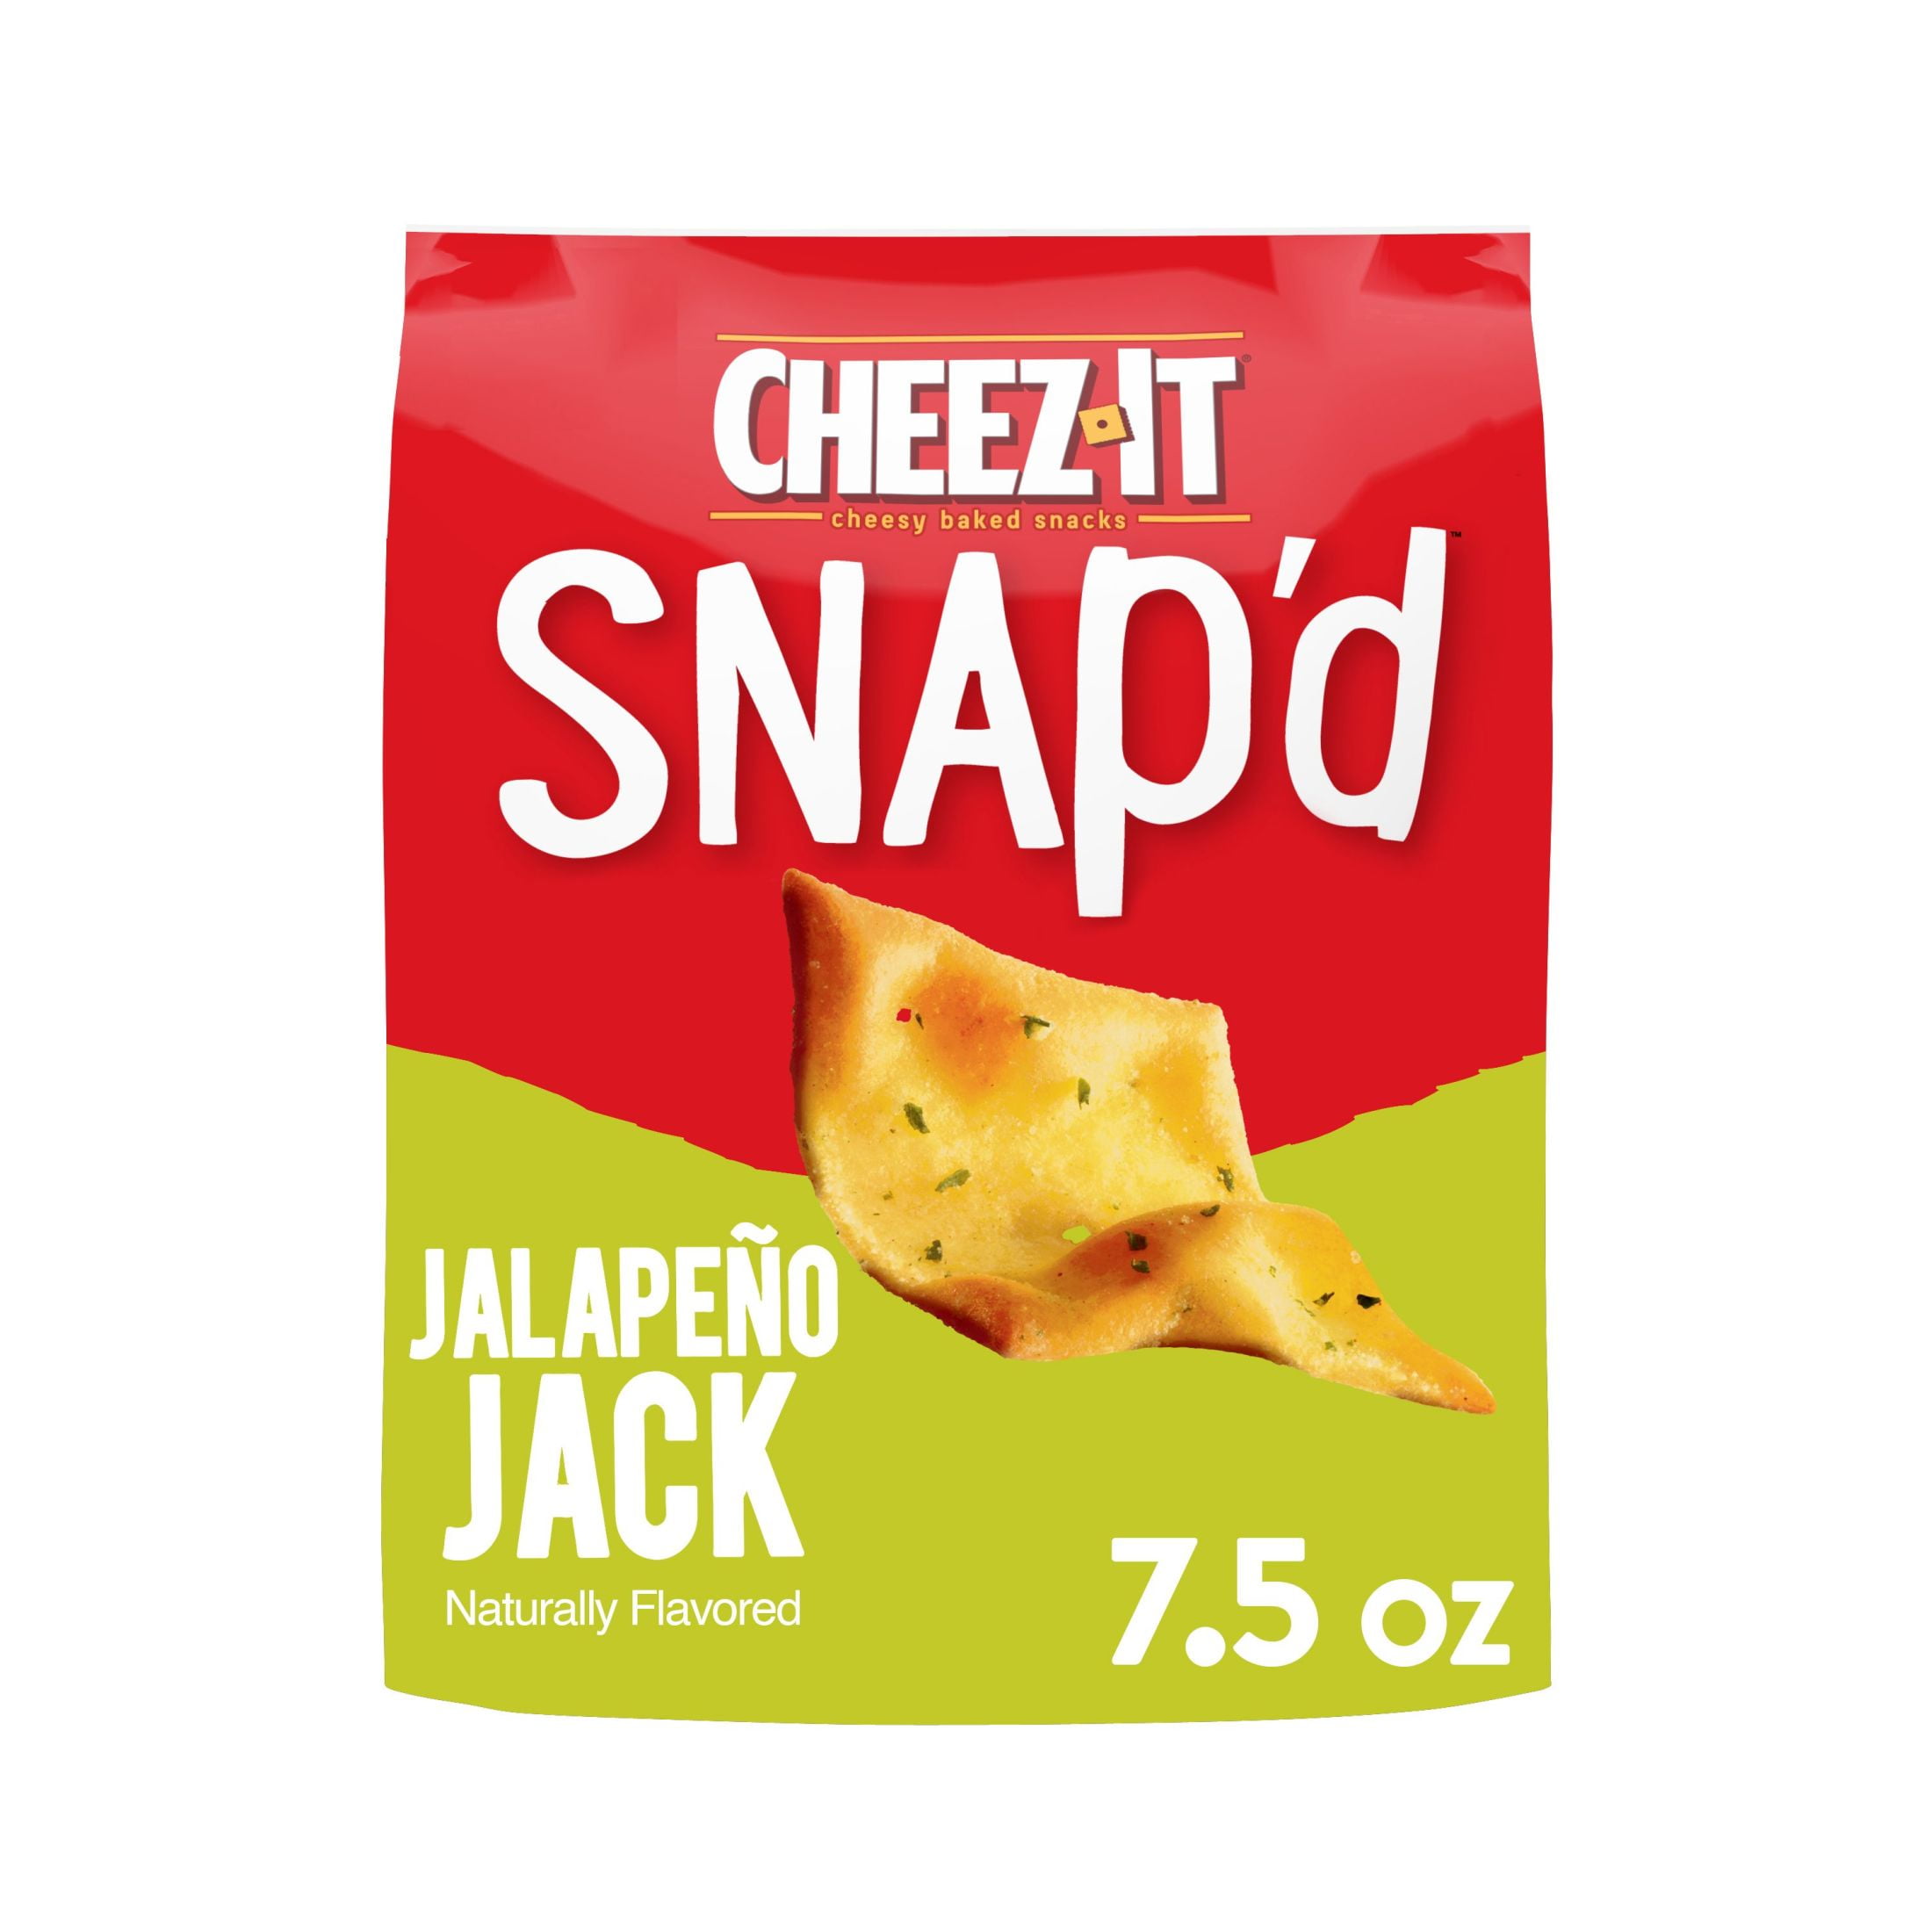 Cheez-It Snap'd Jalapeno Jack Cheese Cracker Chips, 7.5 oz